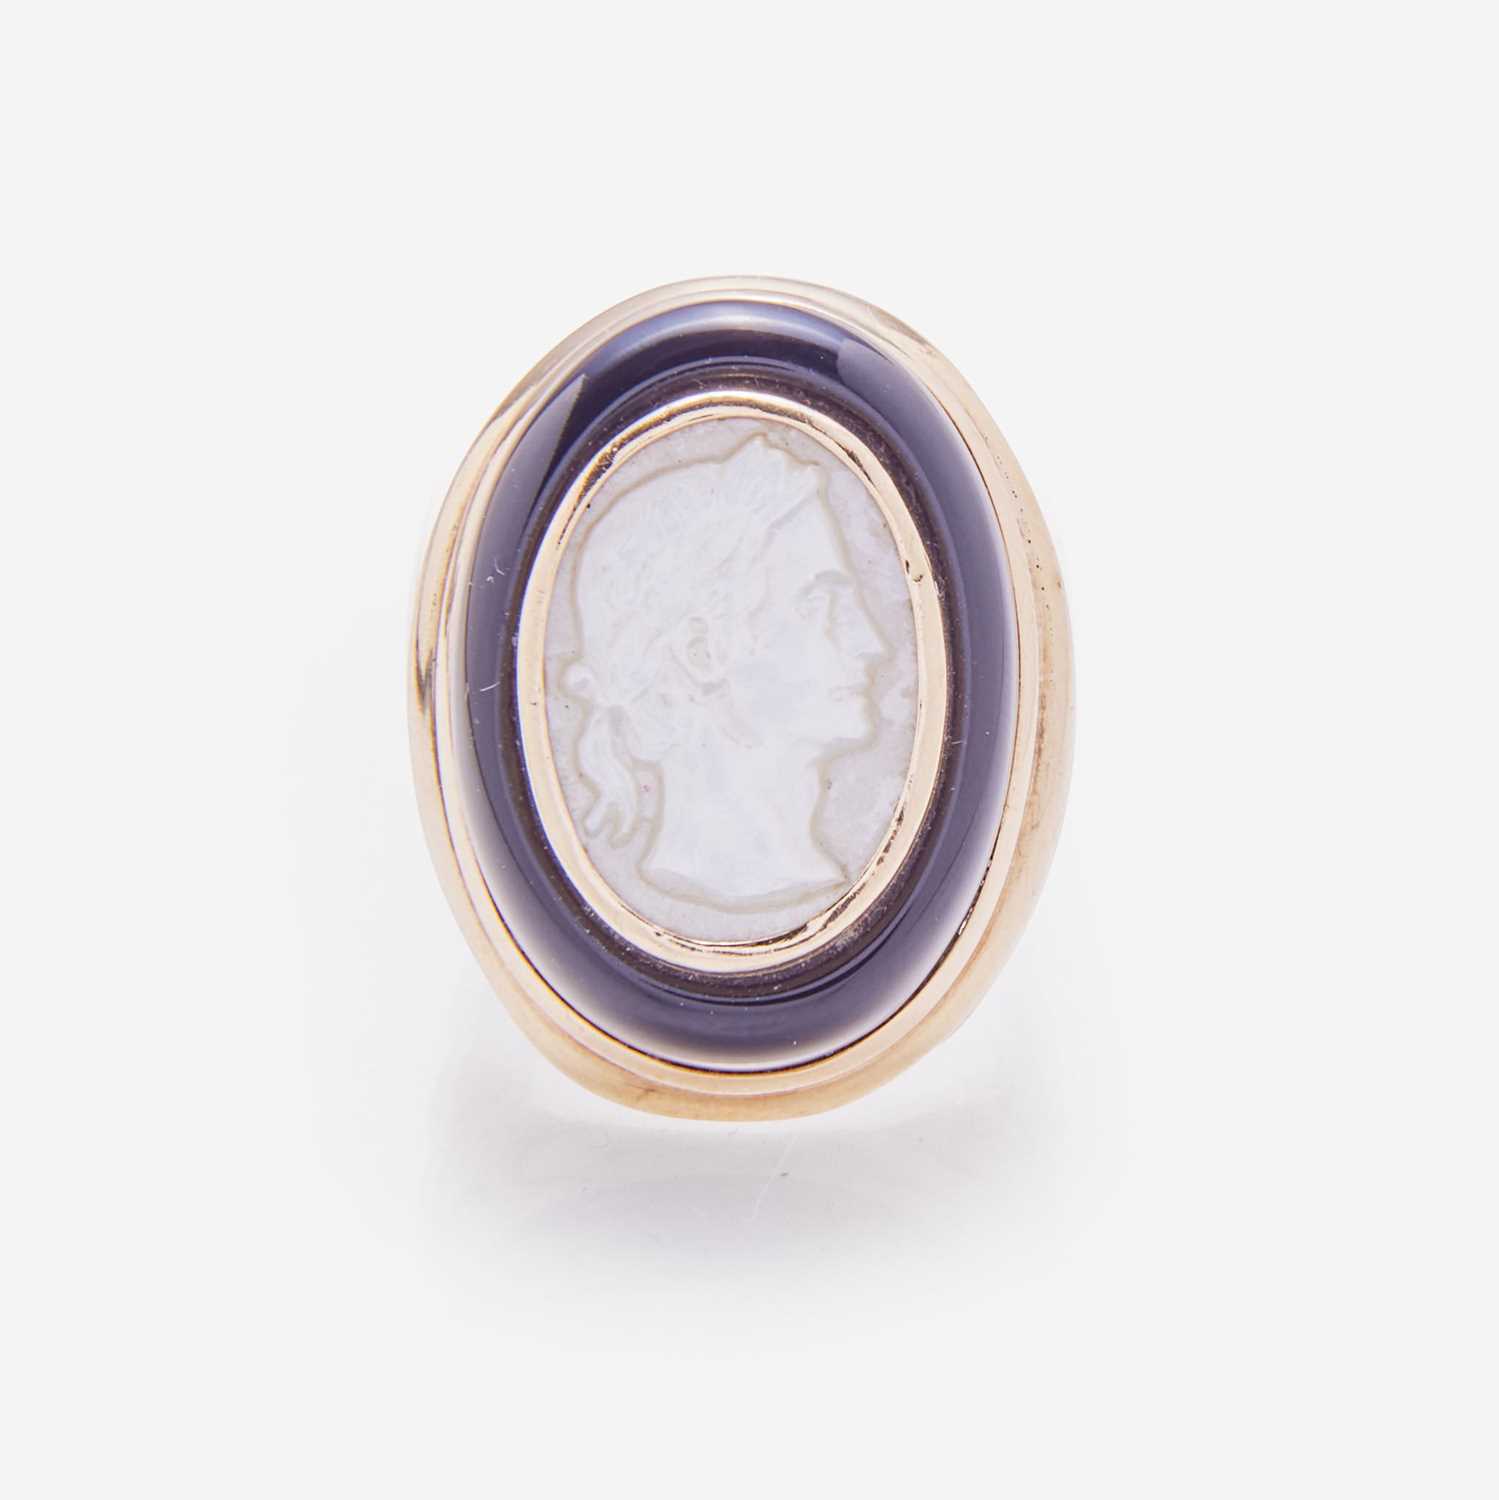 Lot 93 - A 14K Yellow Gold, Black Onyx, and Mother of Pearl Cameo Ring